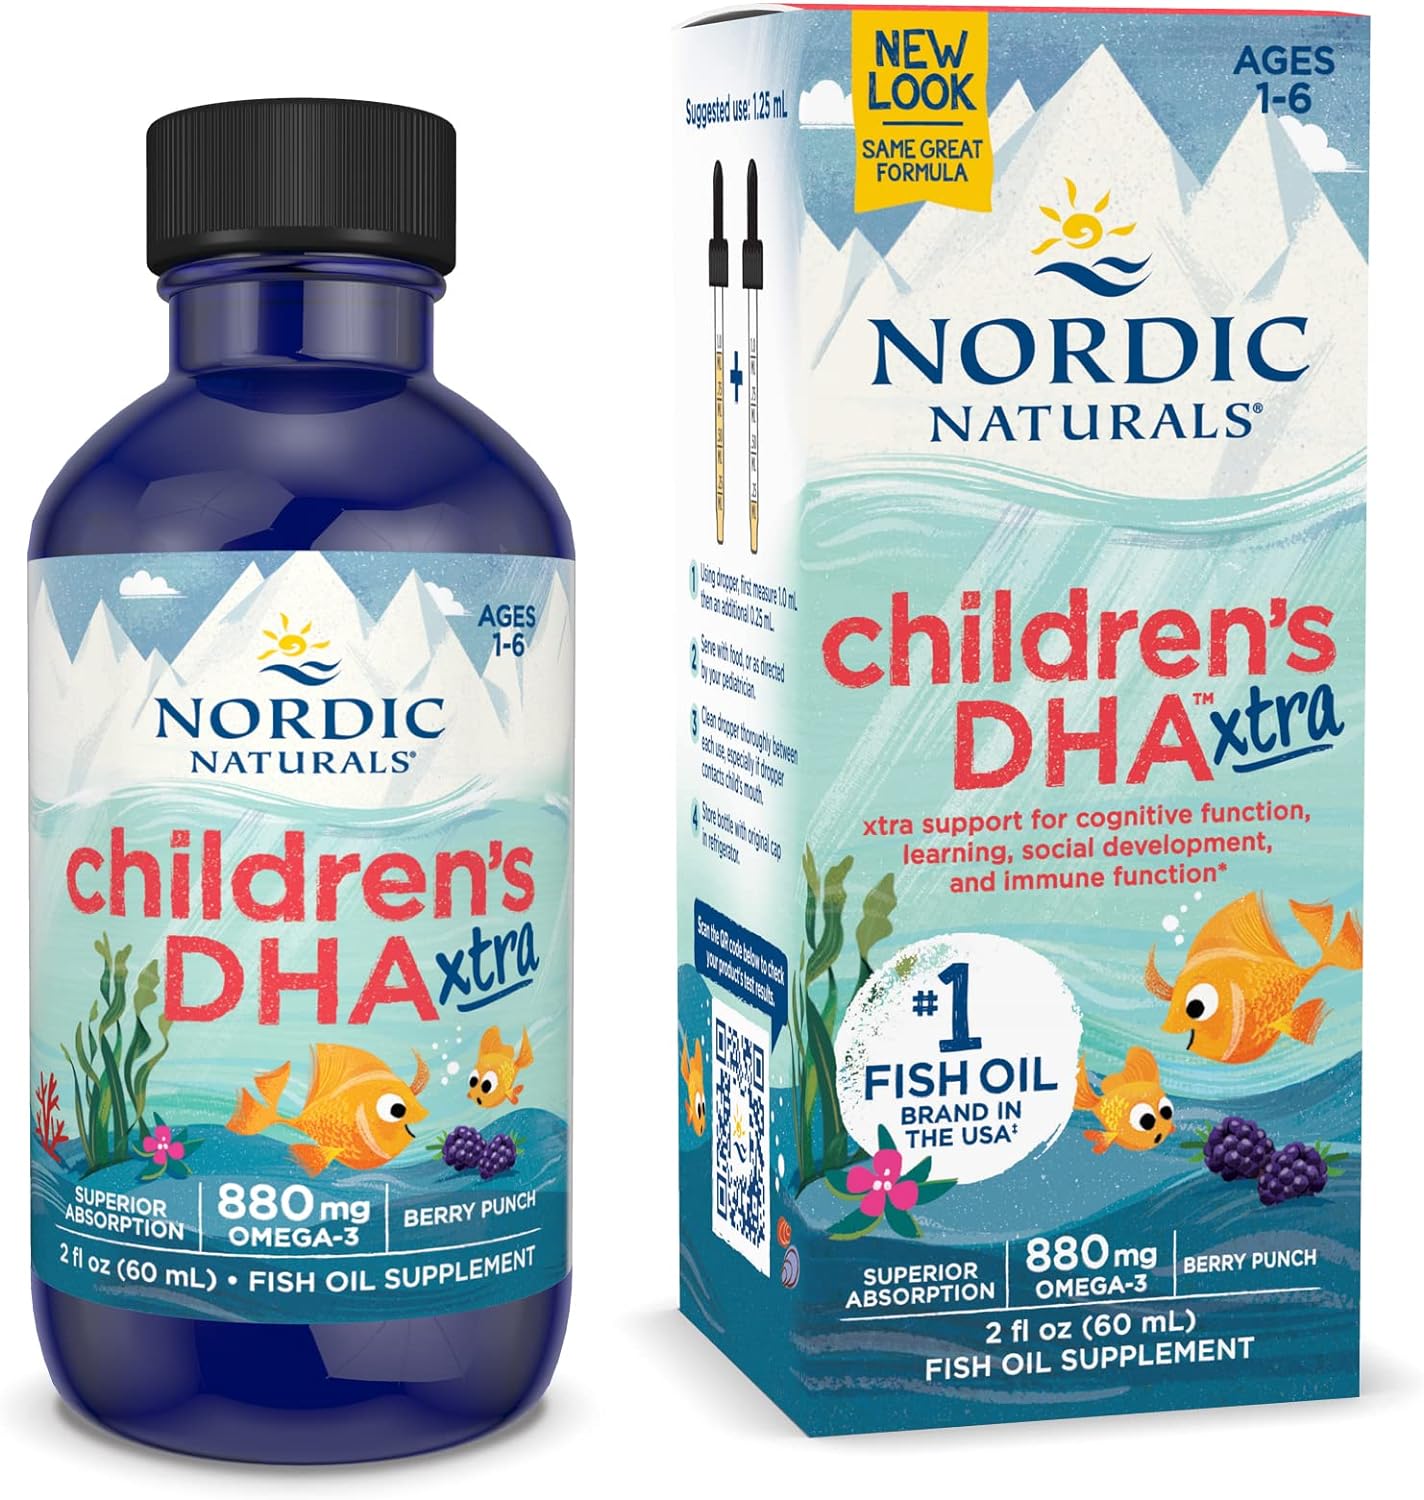 Nordic Naturals Children’s DHA Xtra, Berry Punch - 2 oz for Kids - 880